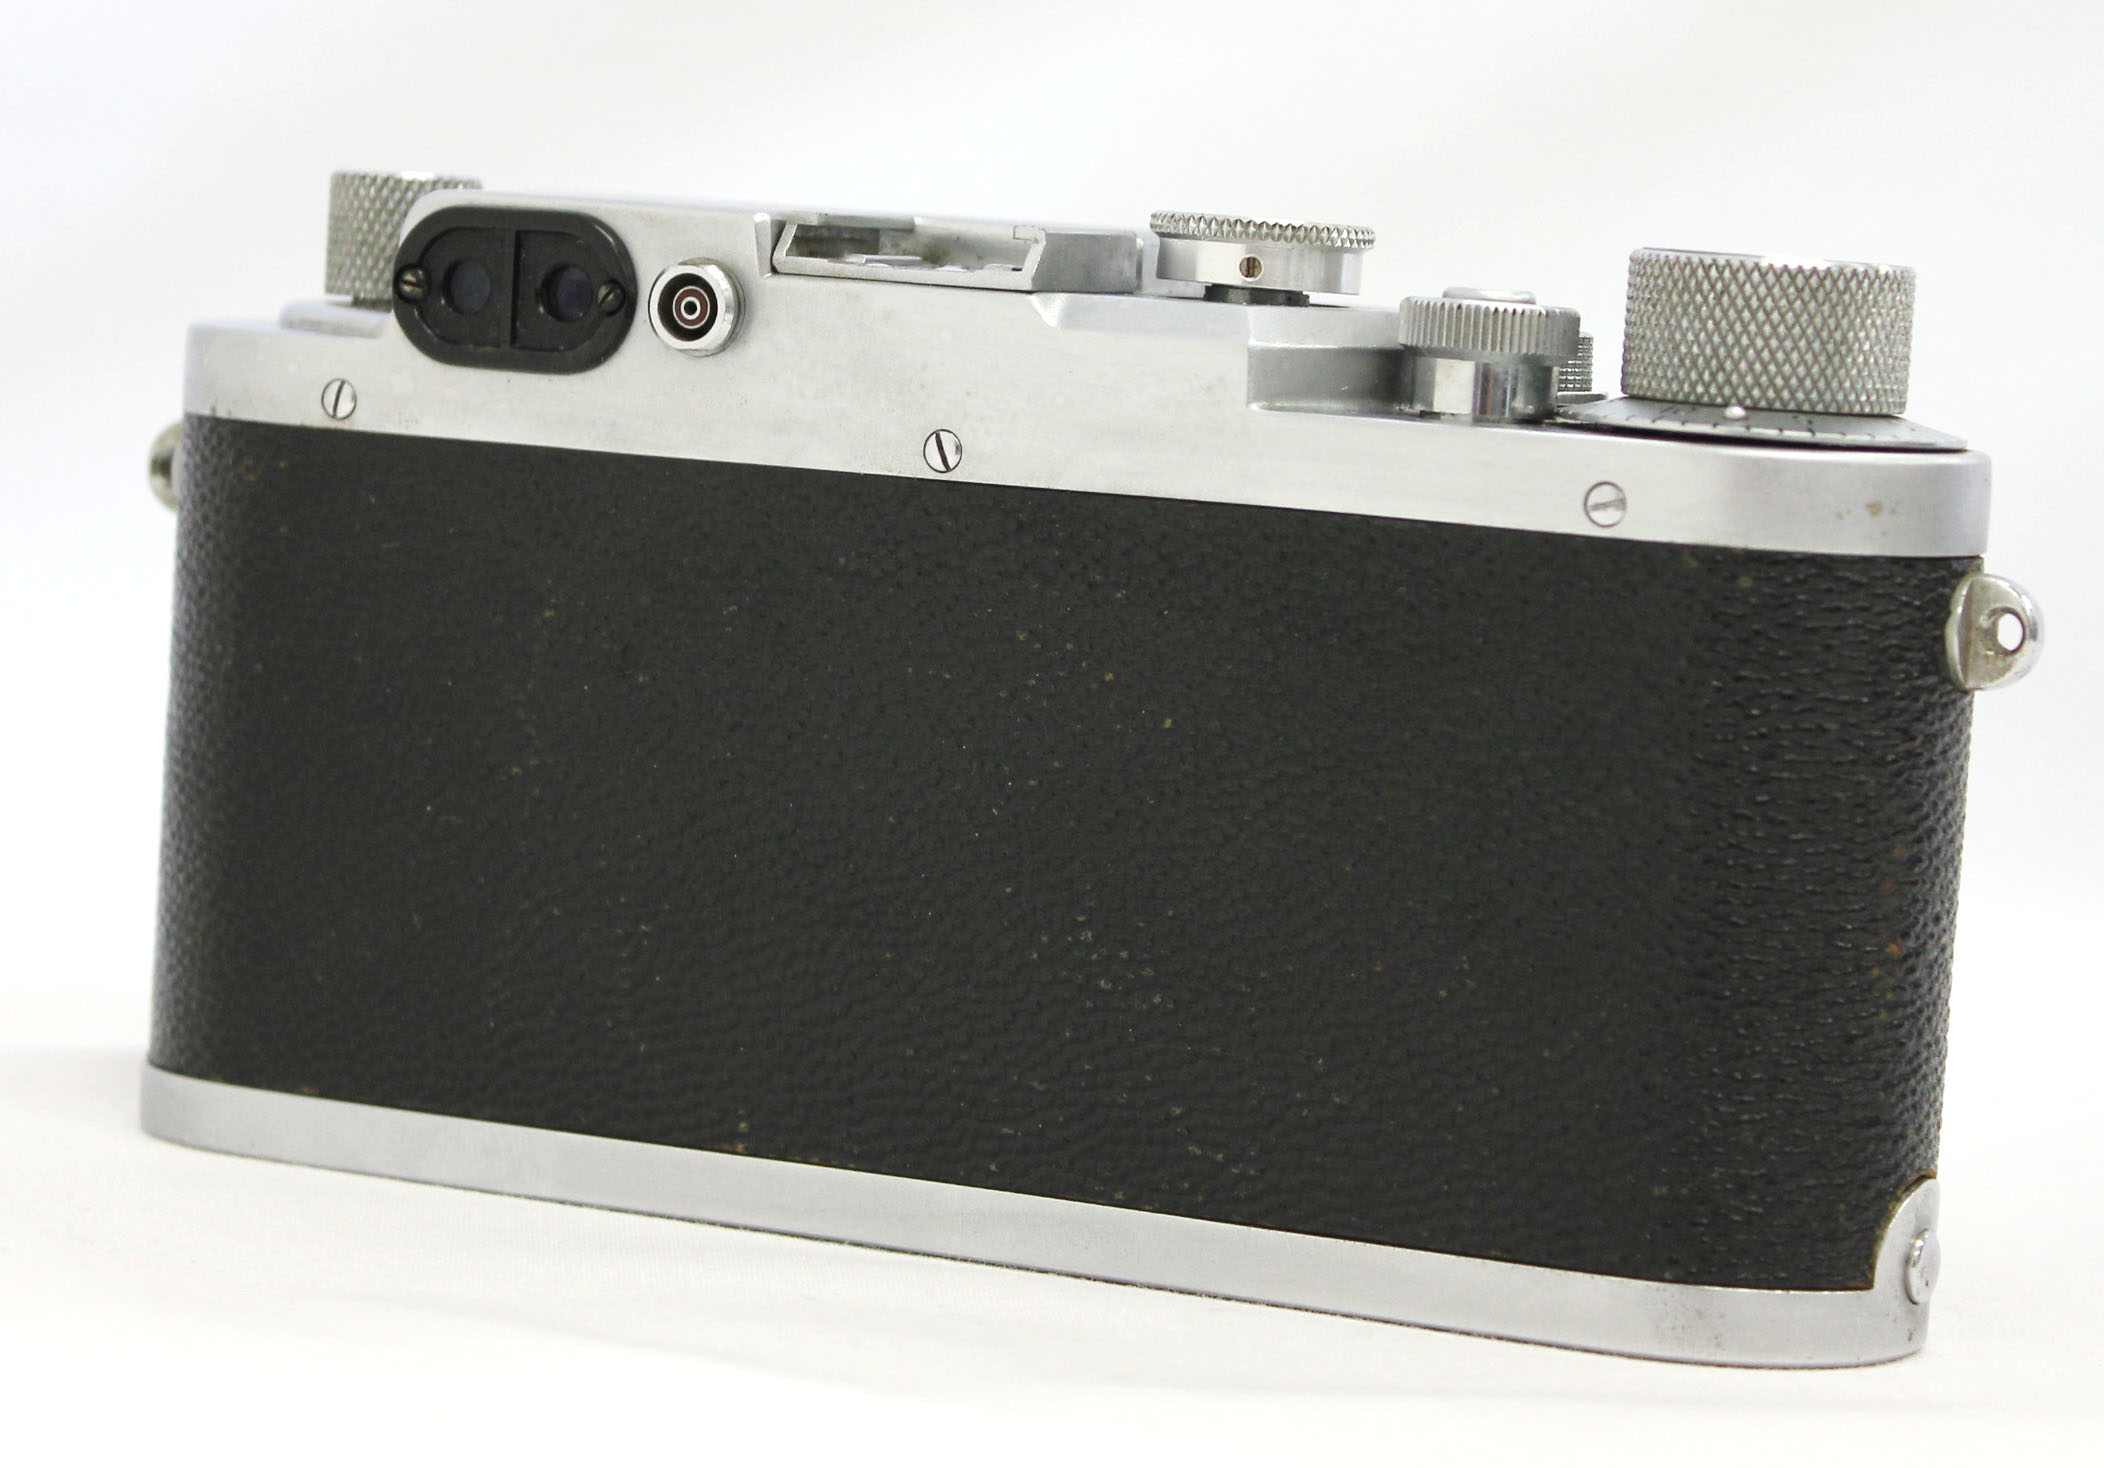 Leotax F Leica Screw Mount LTM M39 Rangefinder Camera with 50mm F/3.5 Lens from Japan Photo 5